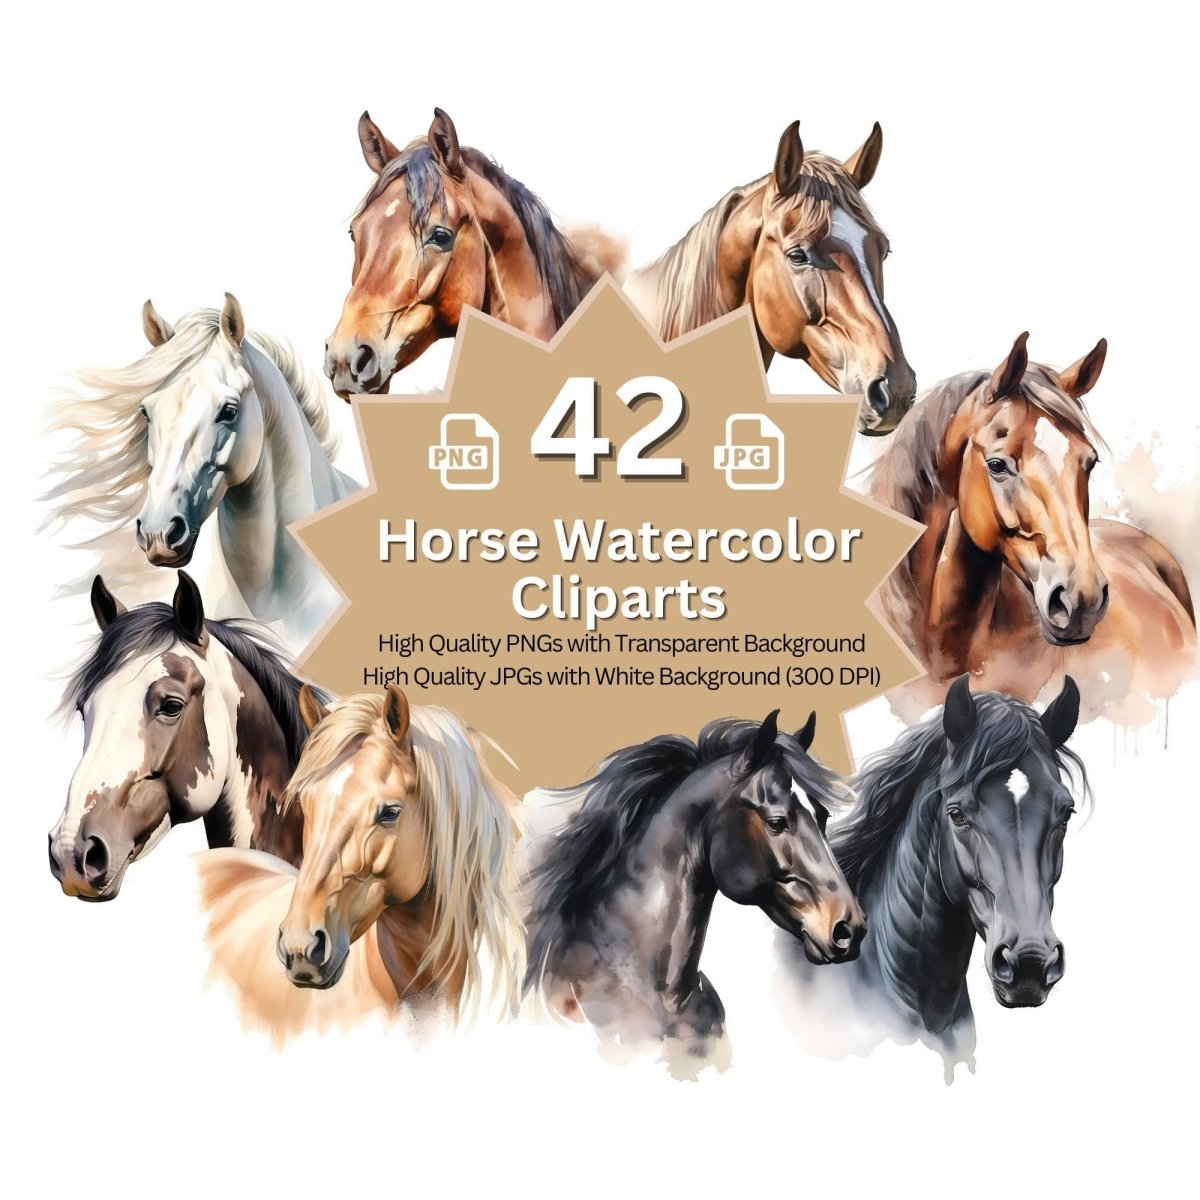 Horse Watercolor Clipart Megabundle 42+42 High Quality PNGs Animal Clipart - Everything Pixel